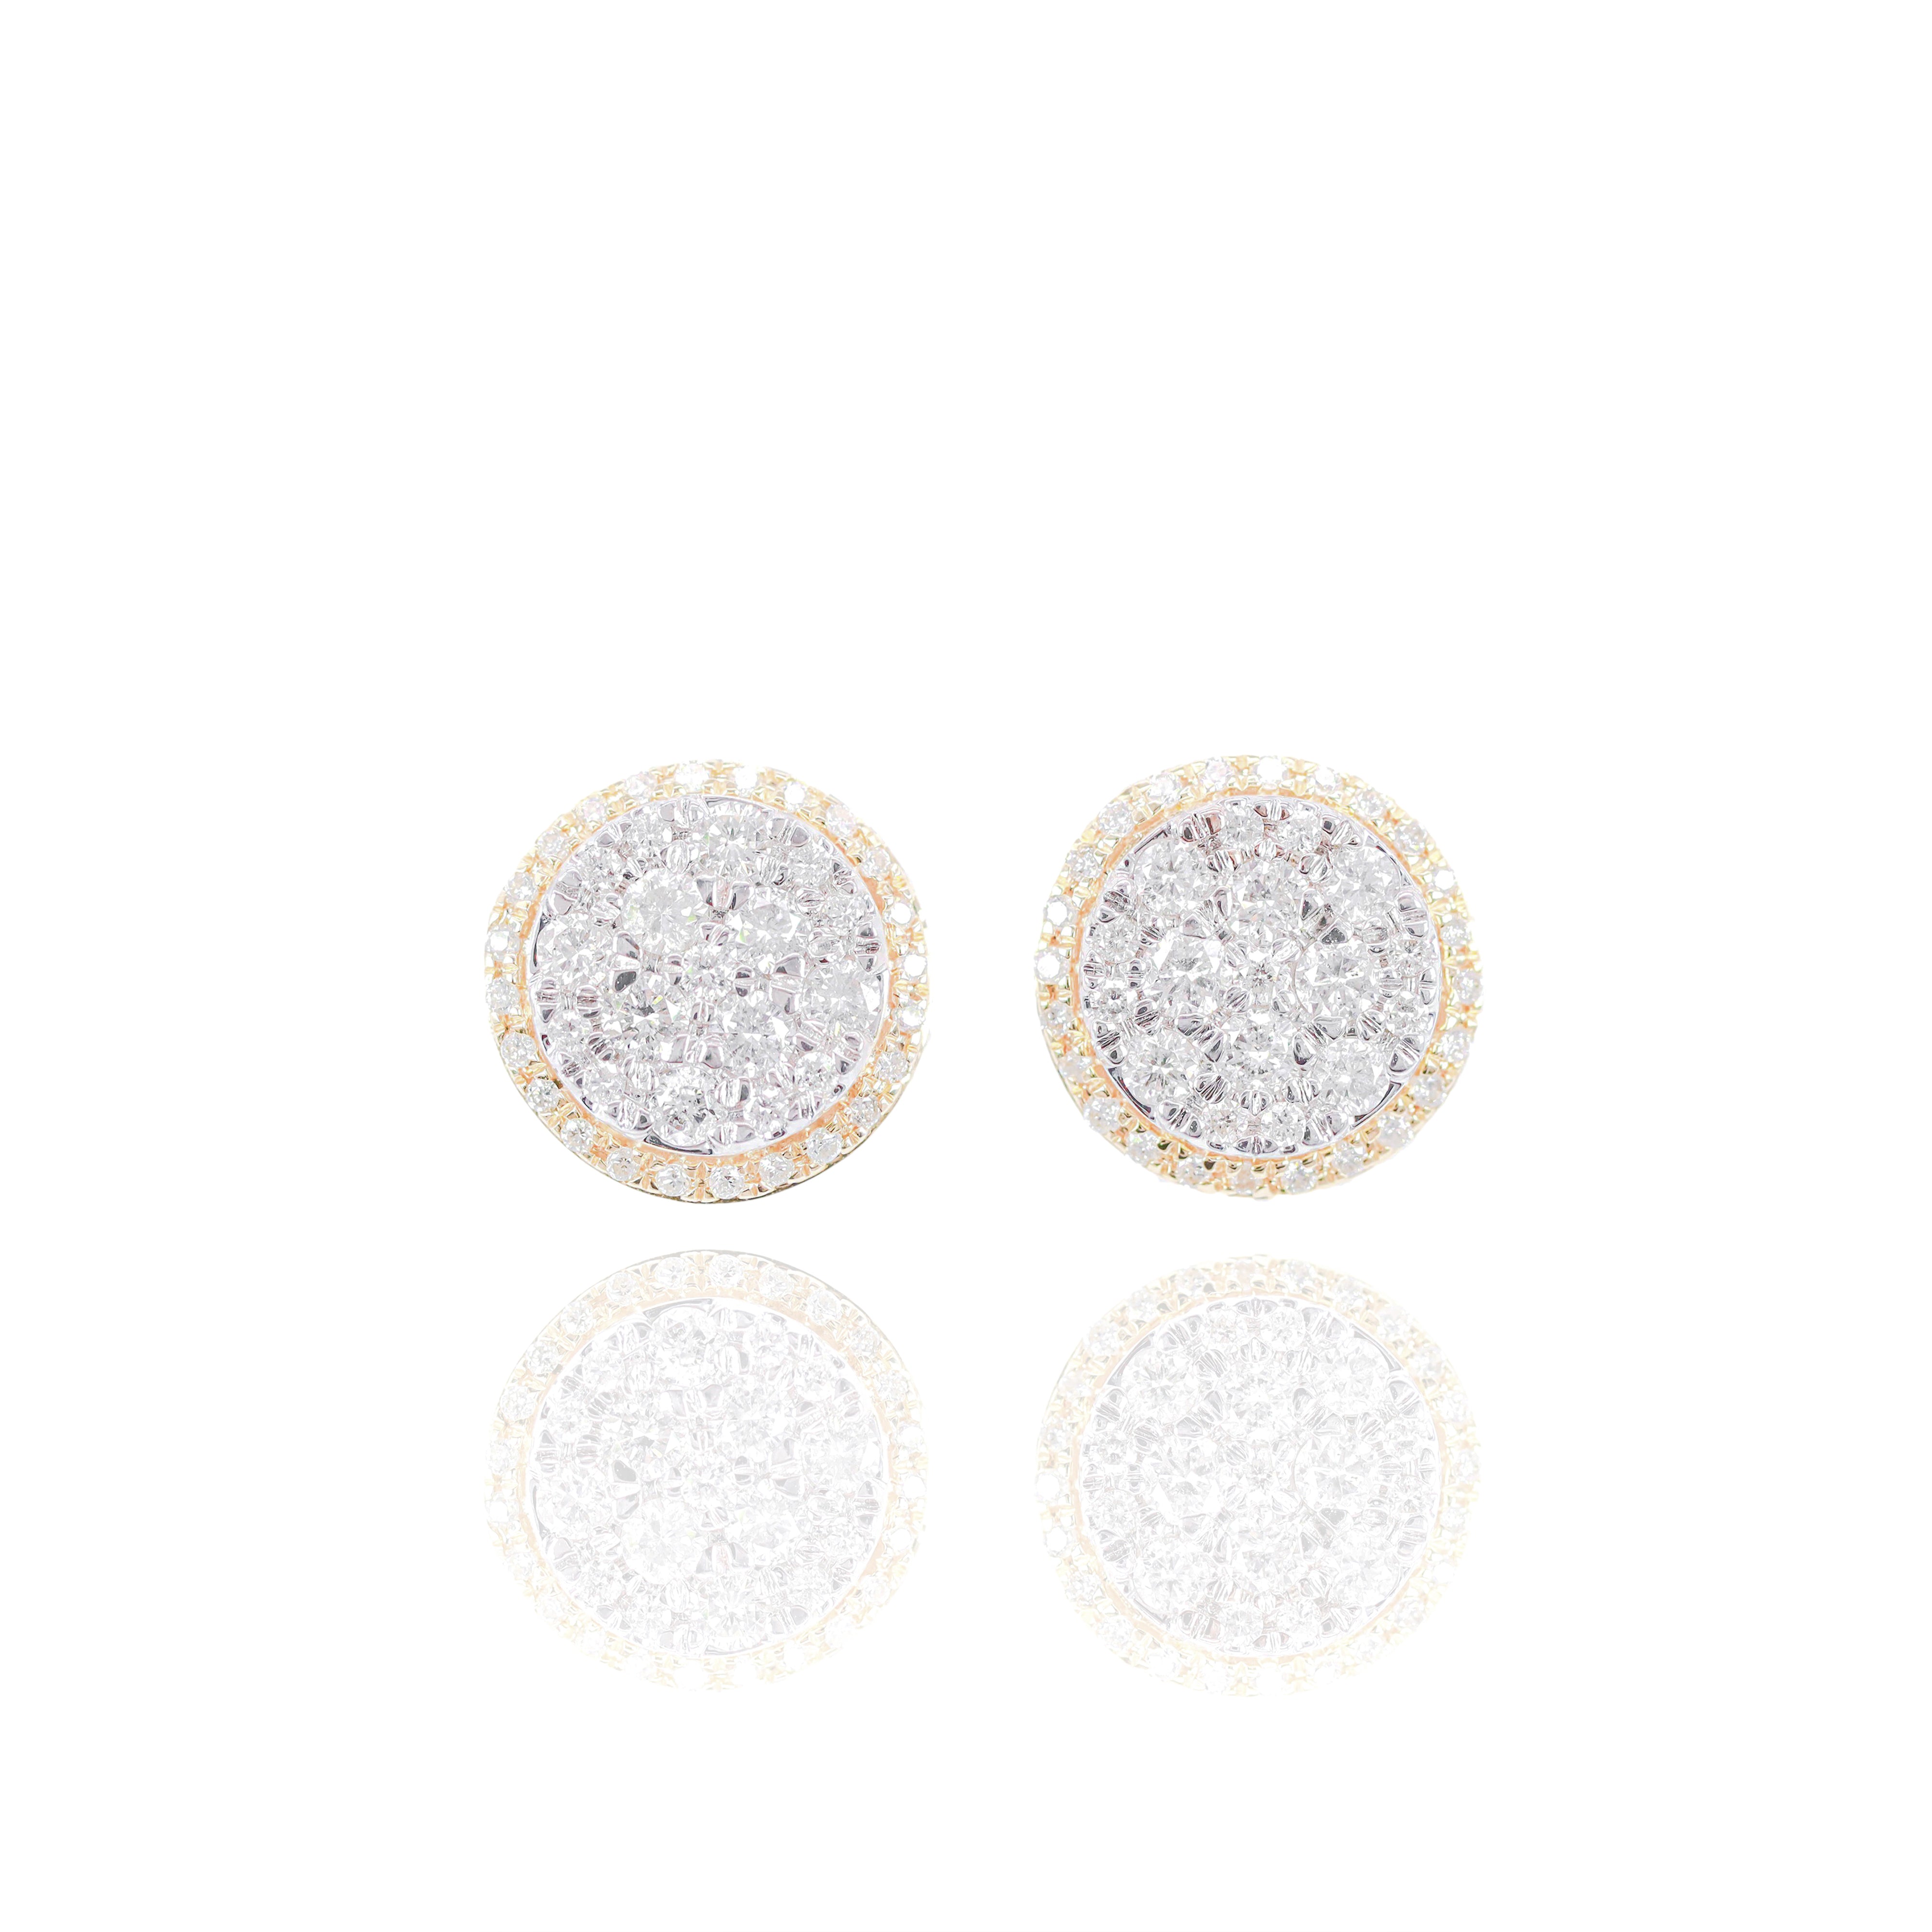 Two-Tone Round Cluster Diamond Earrings